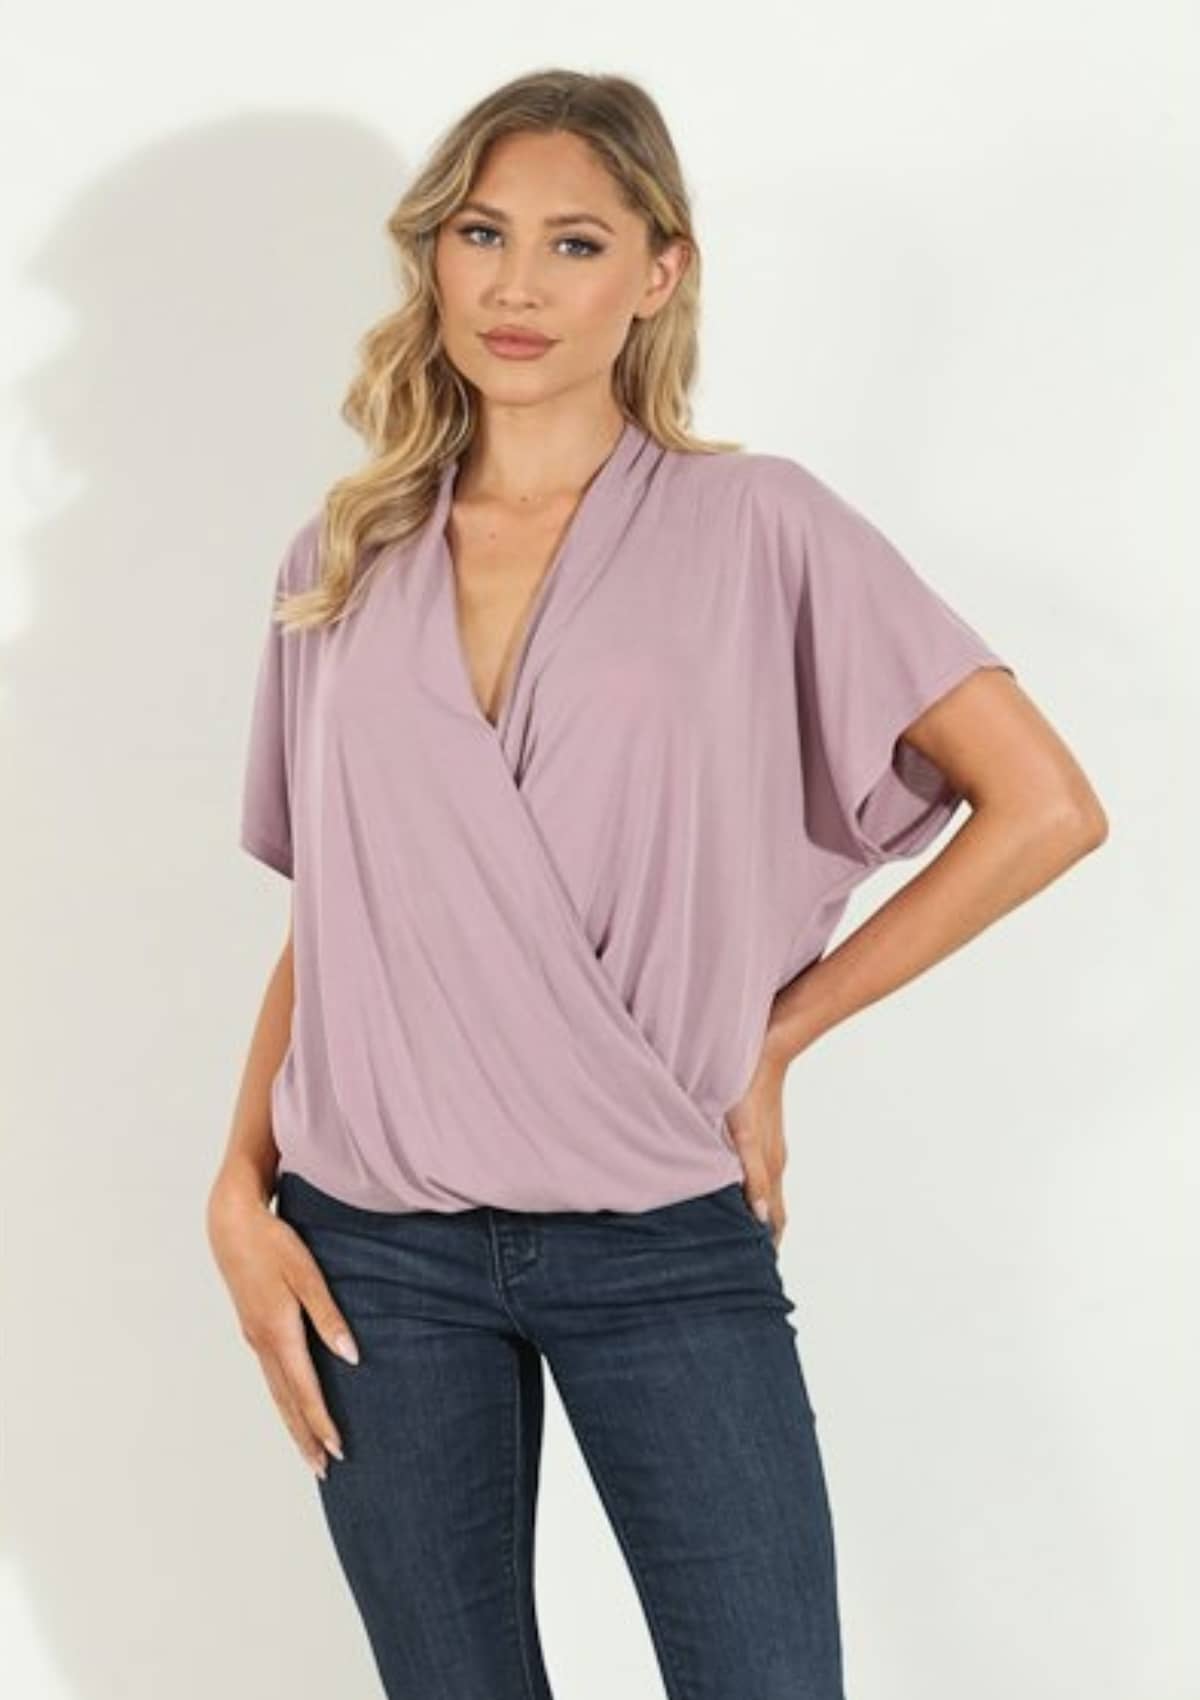 Casual Tops-Clothing-Fancy Tops-Ruby Jane.